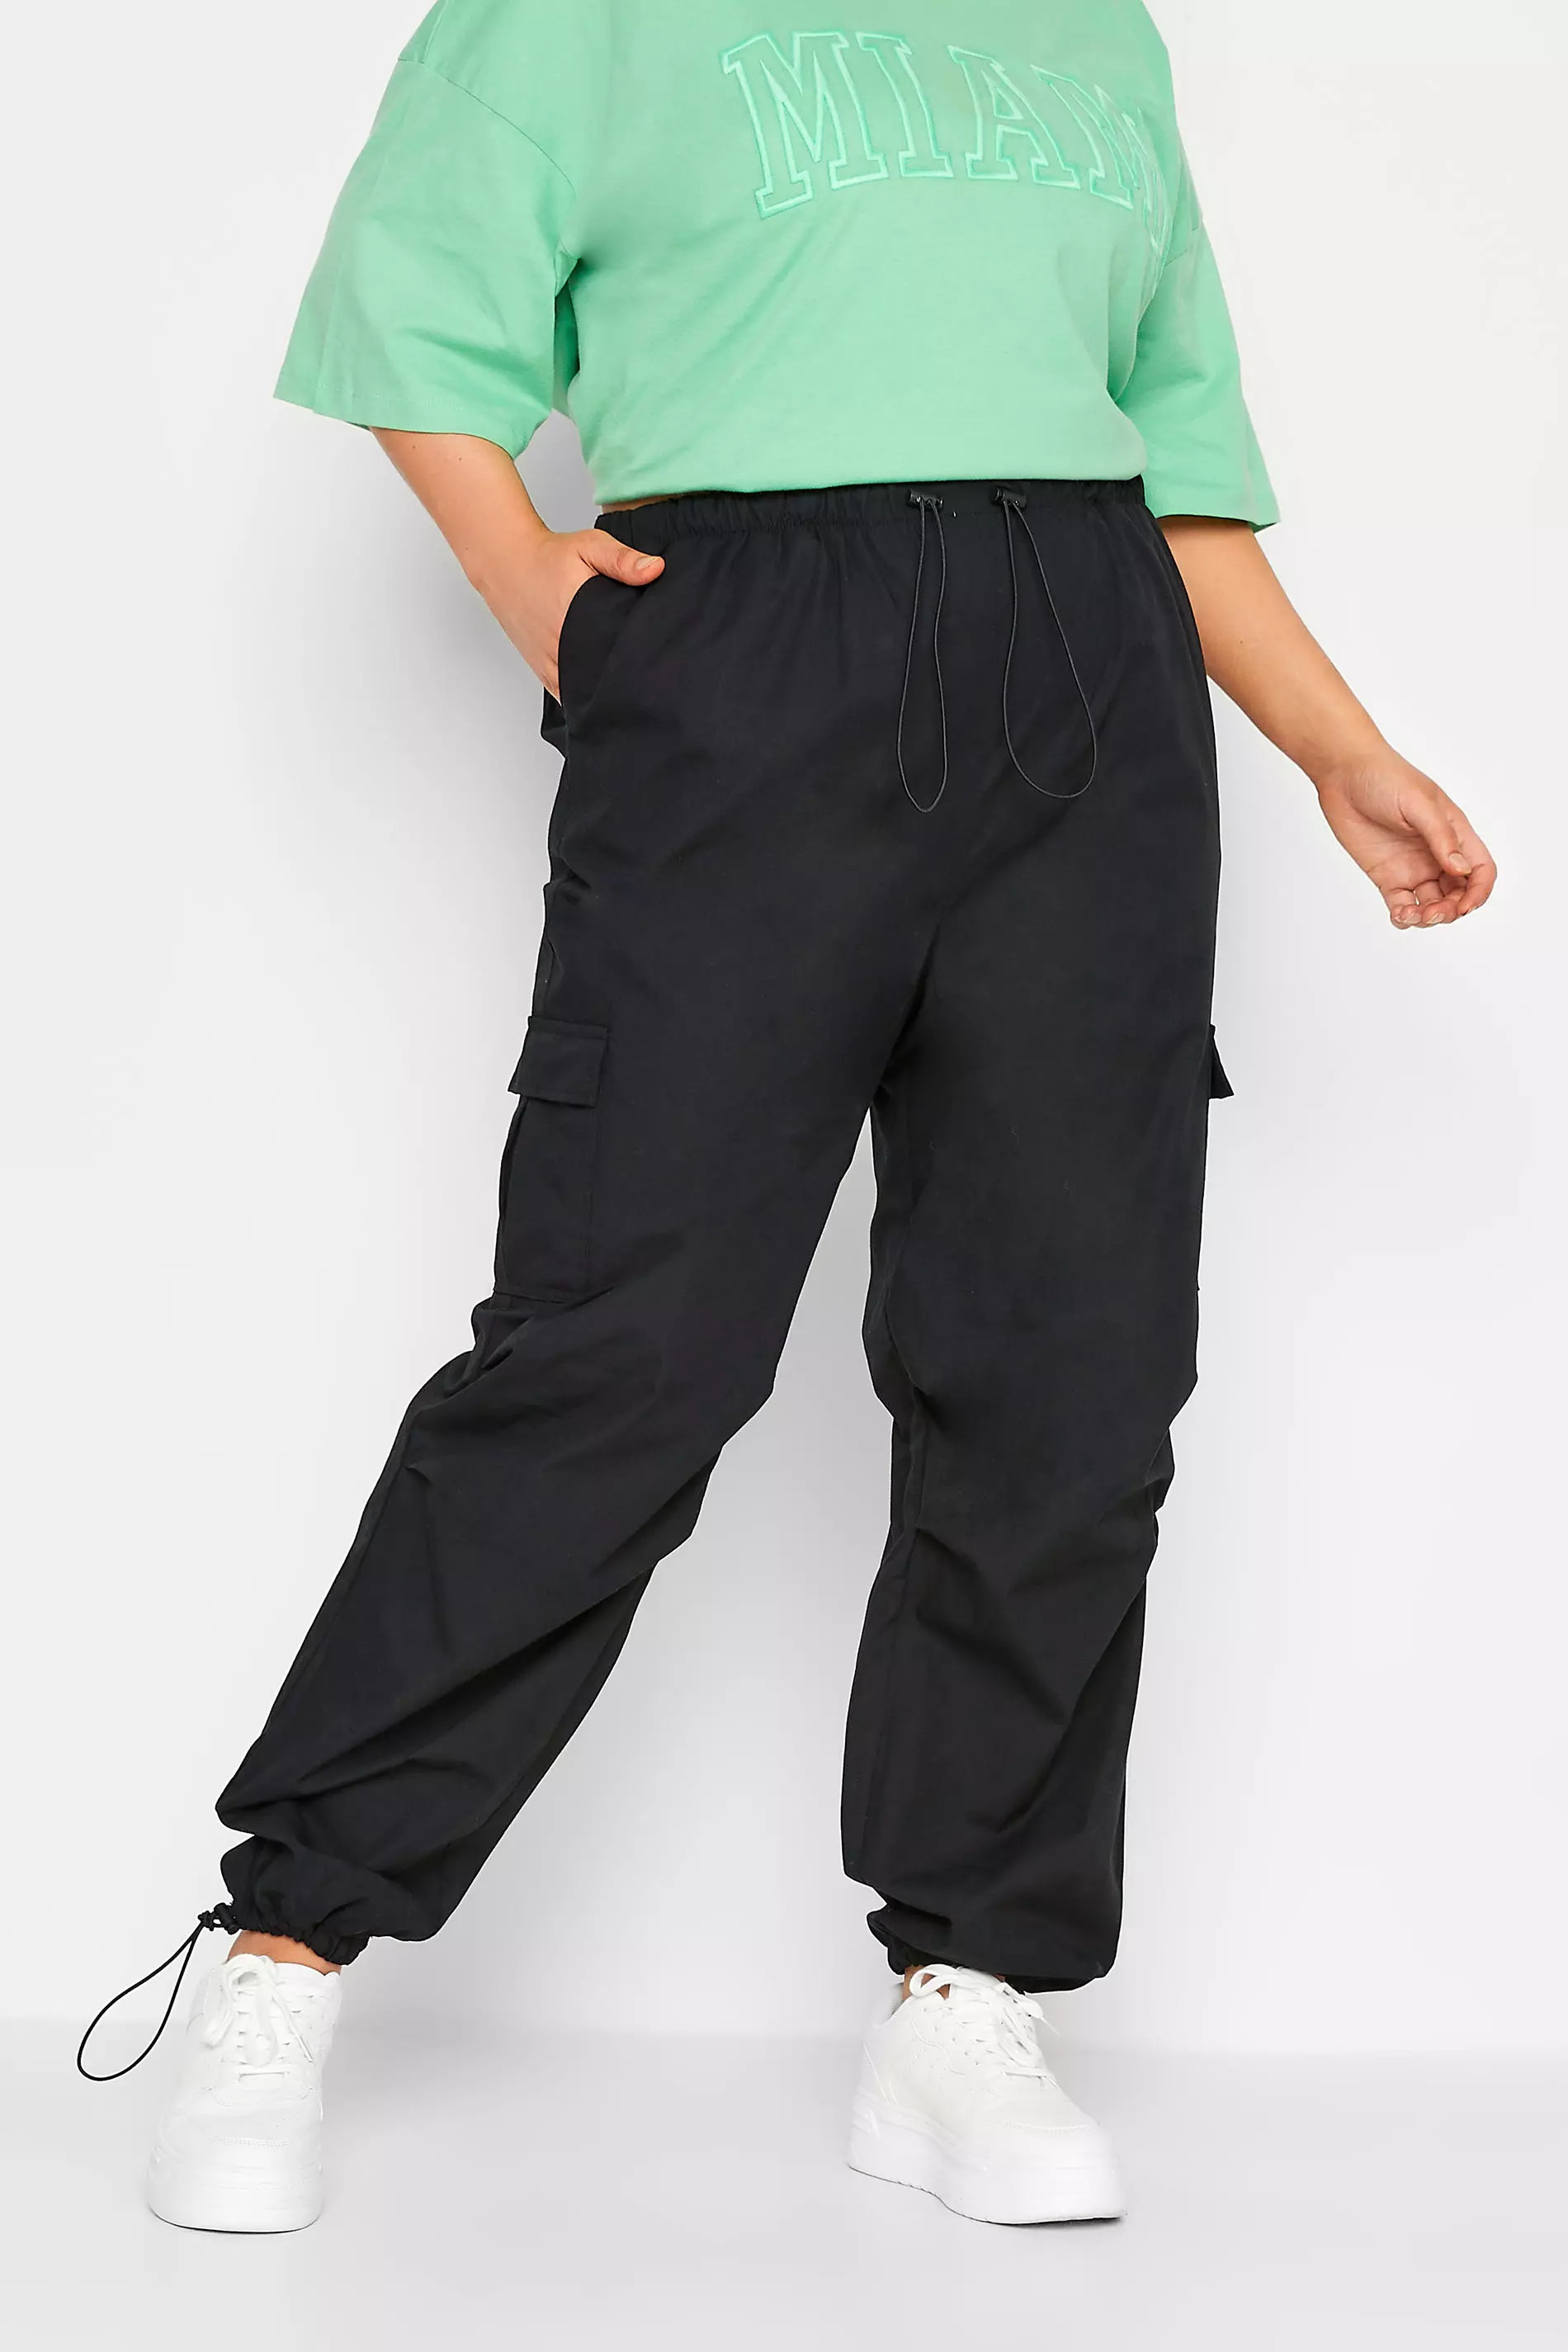 Pockets For Women - Yours Curve Black Cuffed Cargo Parachute Trousers,  Women's Curve & Plus Size, Yours